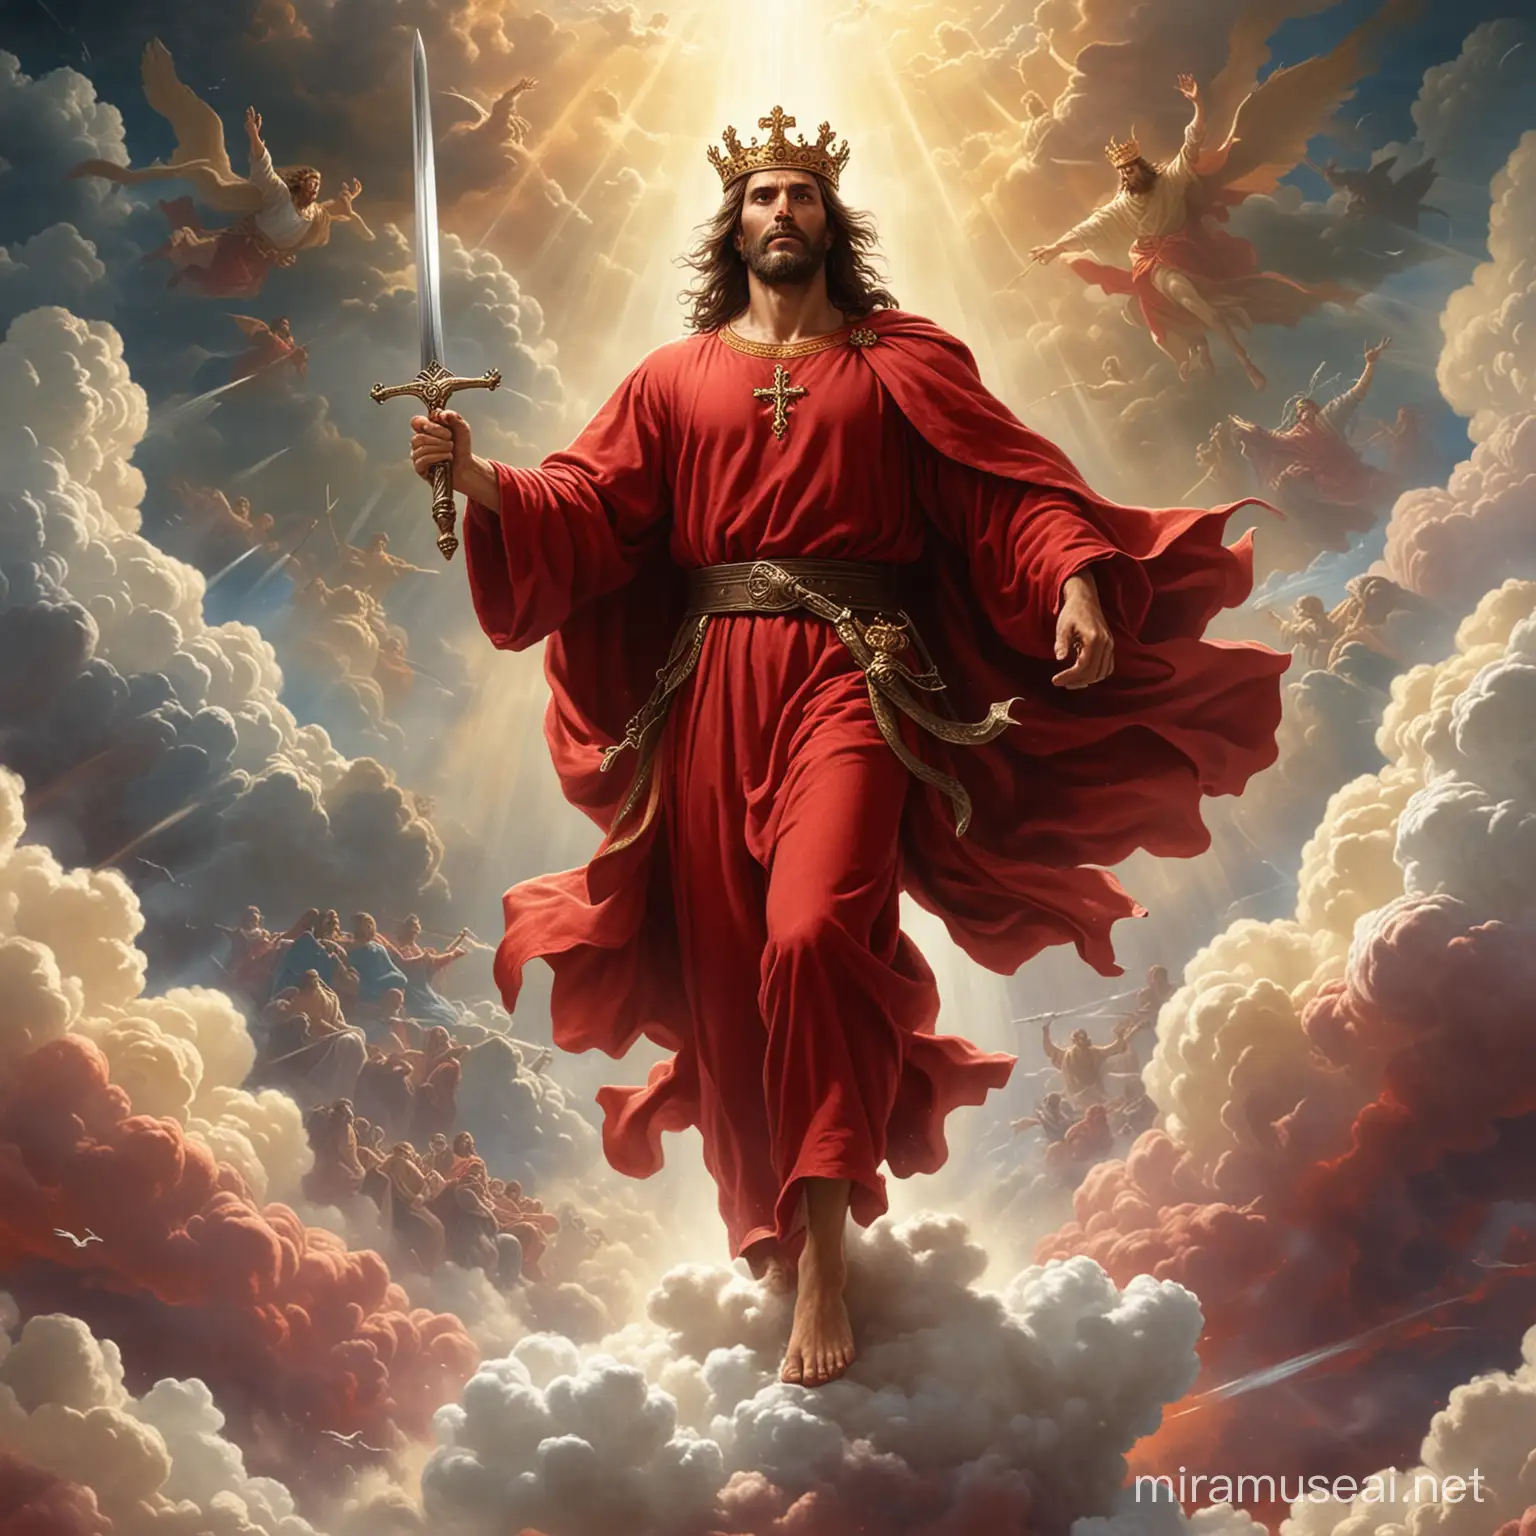 Jesus Christ in Red Robes with a Sword and Crown descending from Clouds of Glory, hd, detailed